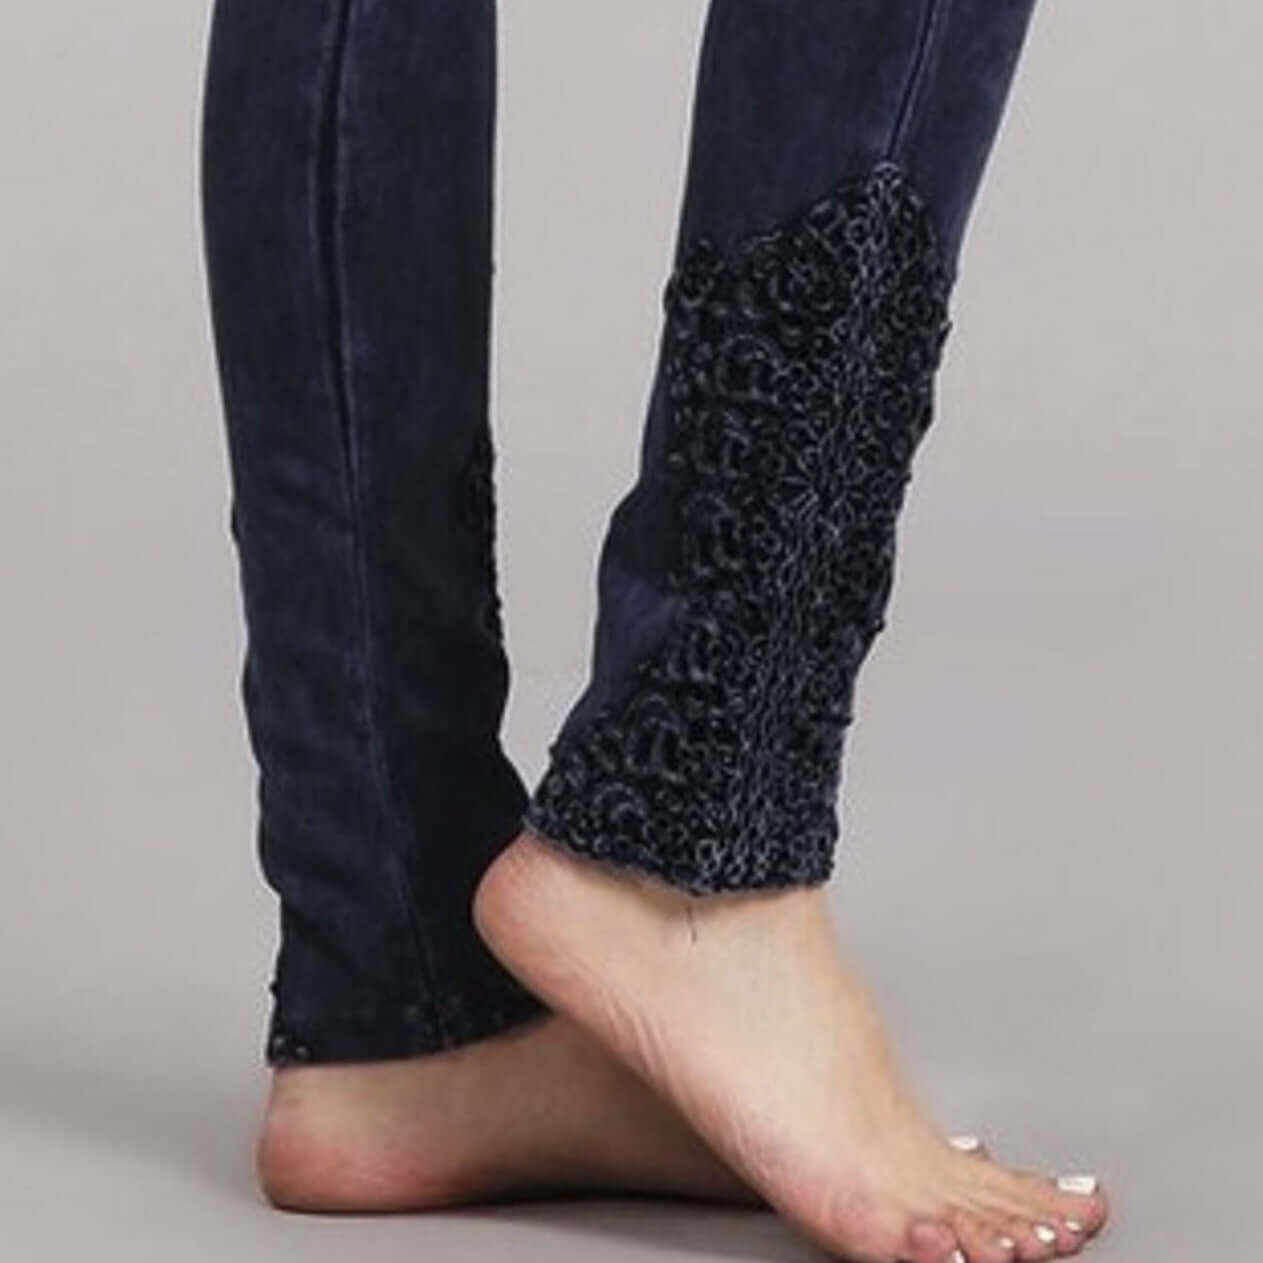 Chatoyant Mineral Washed Jeggings with Crochet Ankle Detail Hem Style# C30396 | Women's Fashion Clothing made in USA | Classy Cozy Cool Boutique